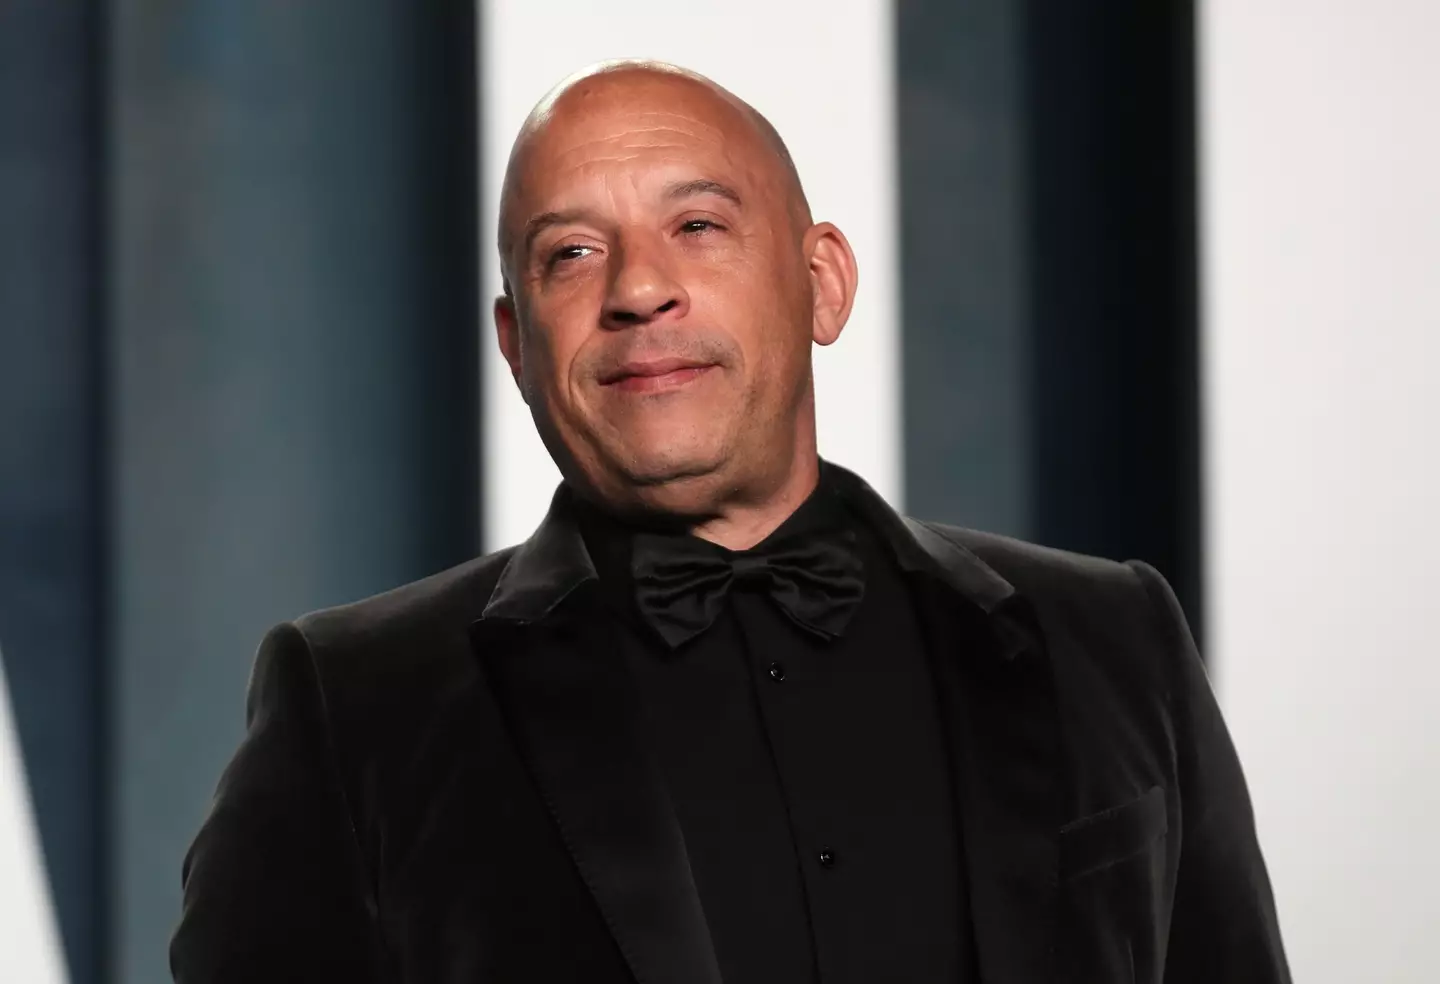 The honour of 'world's hottest bald man' now belongs to Vin Diesel.